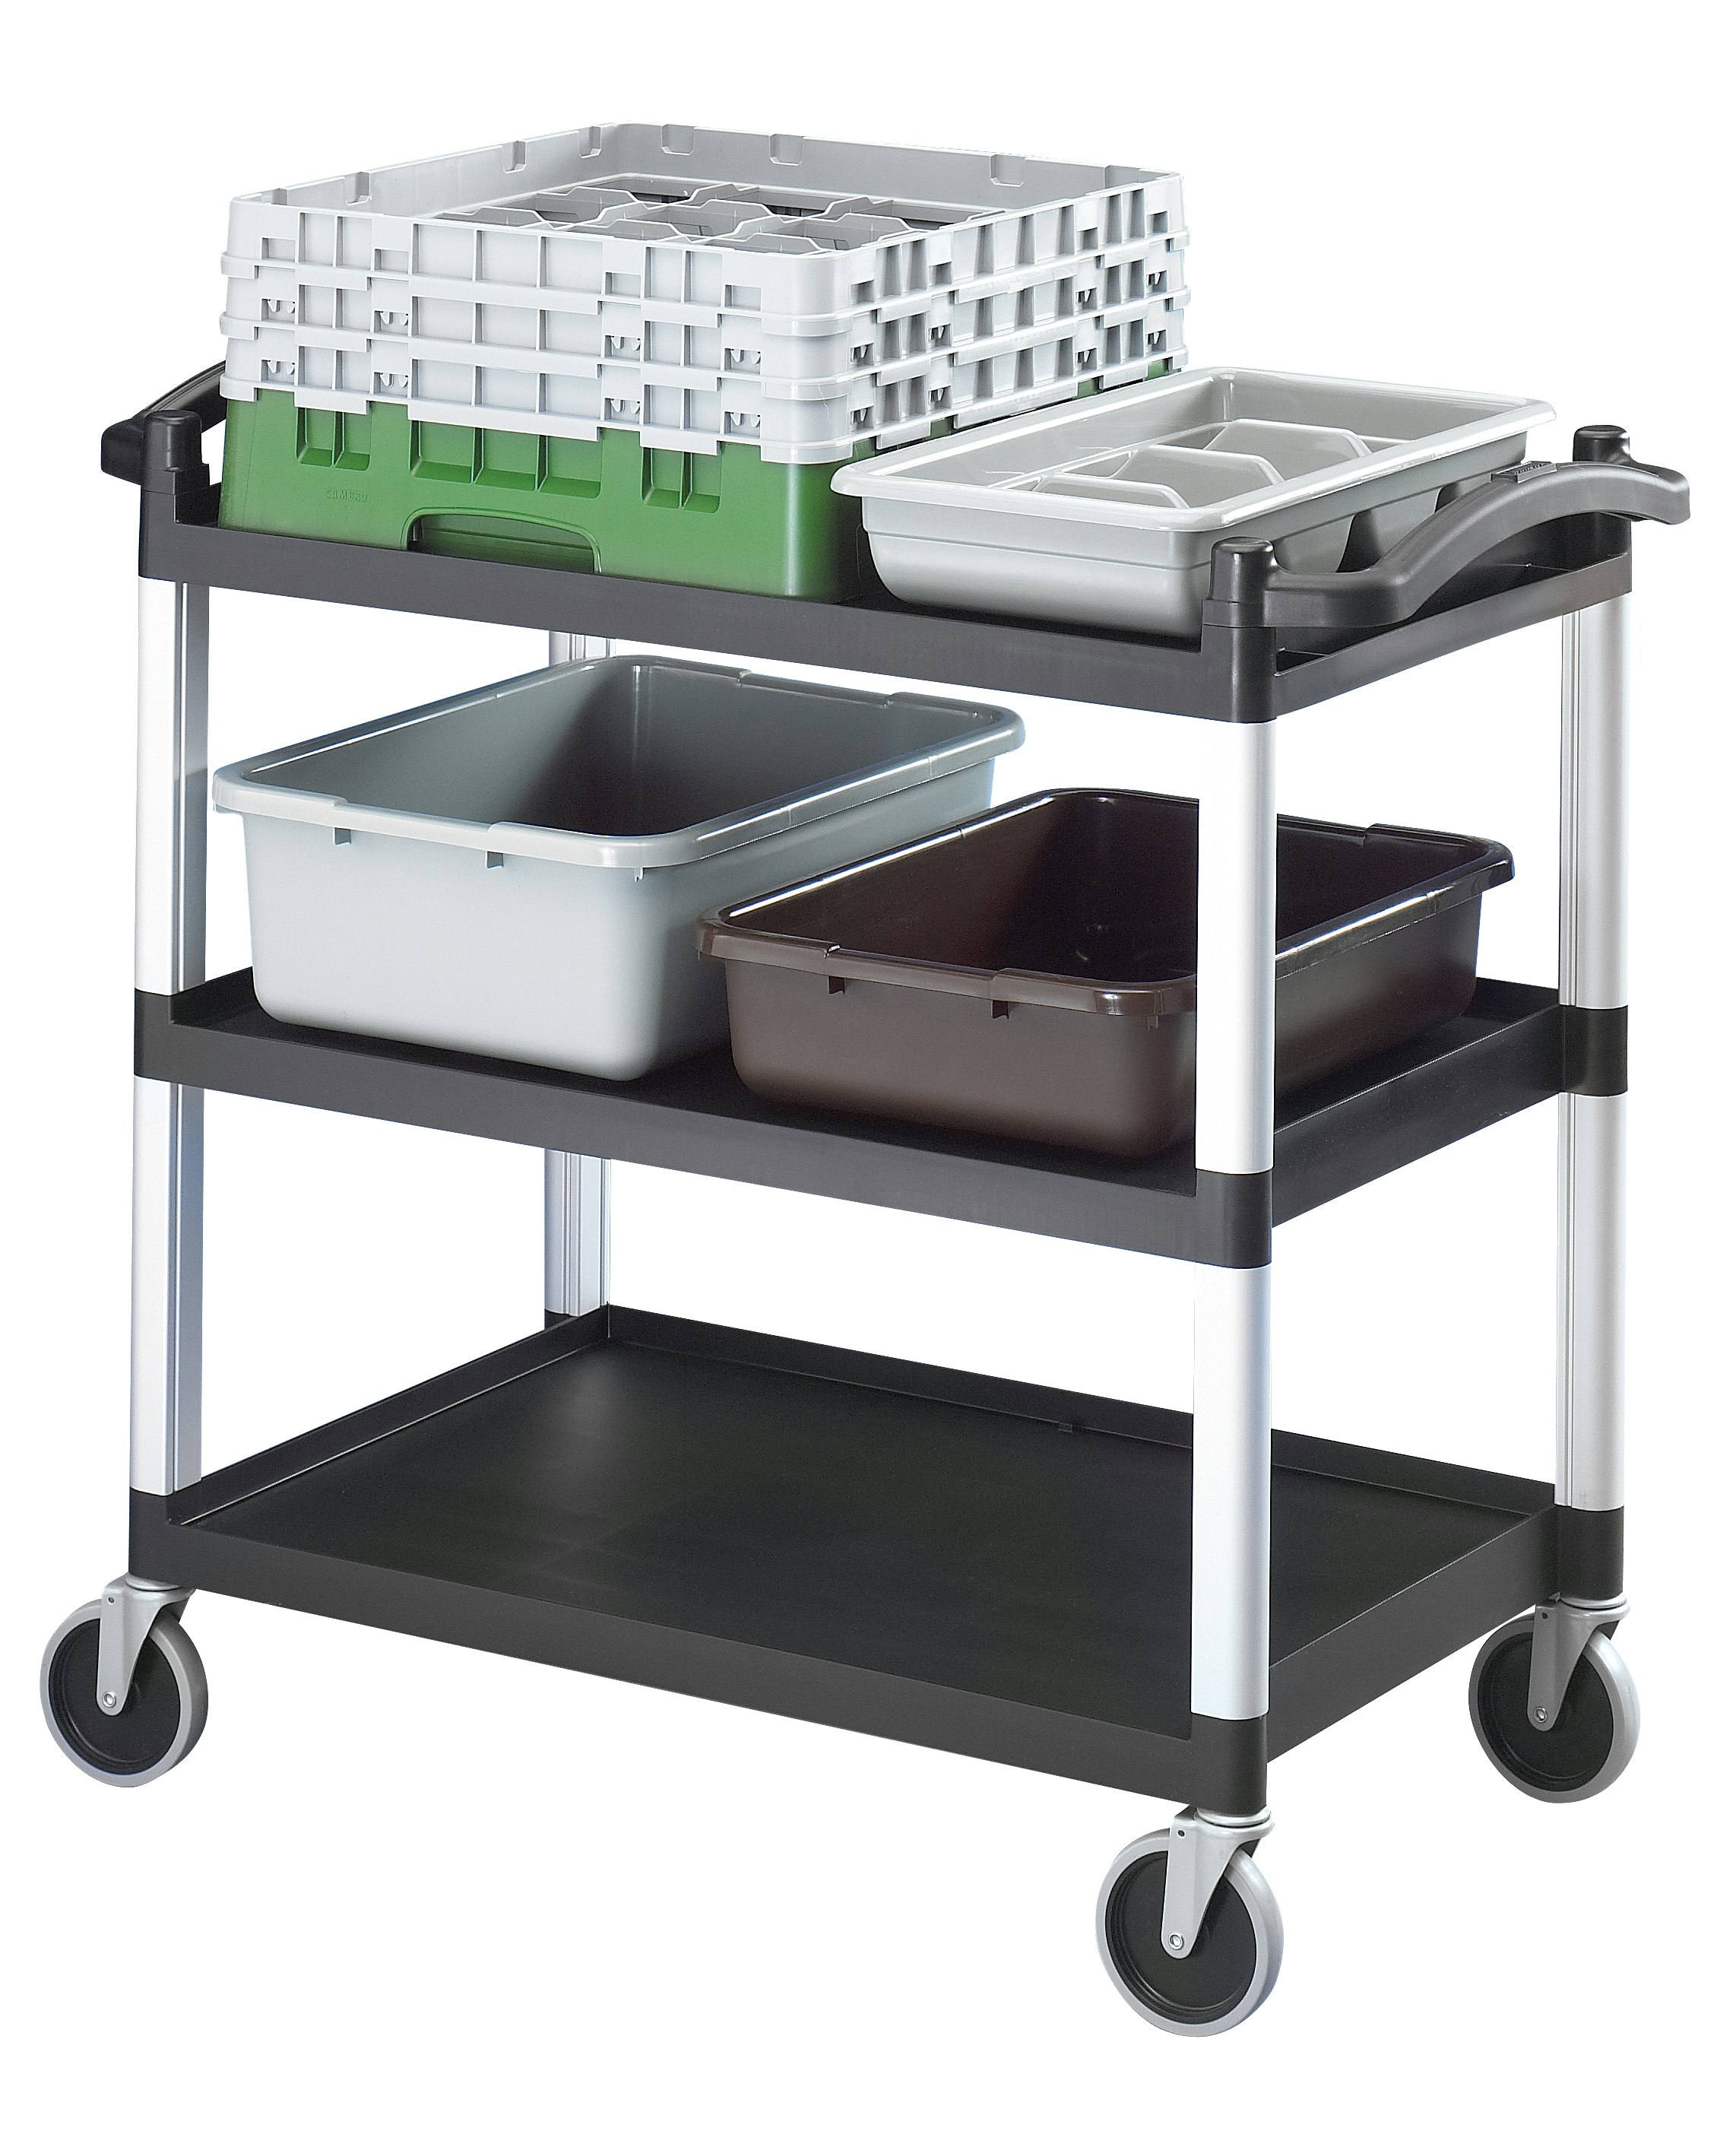 with 2 shelf levels Chunky Bunk Trolley Table Cart Load Capacity 120 kg 